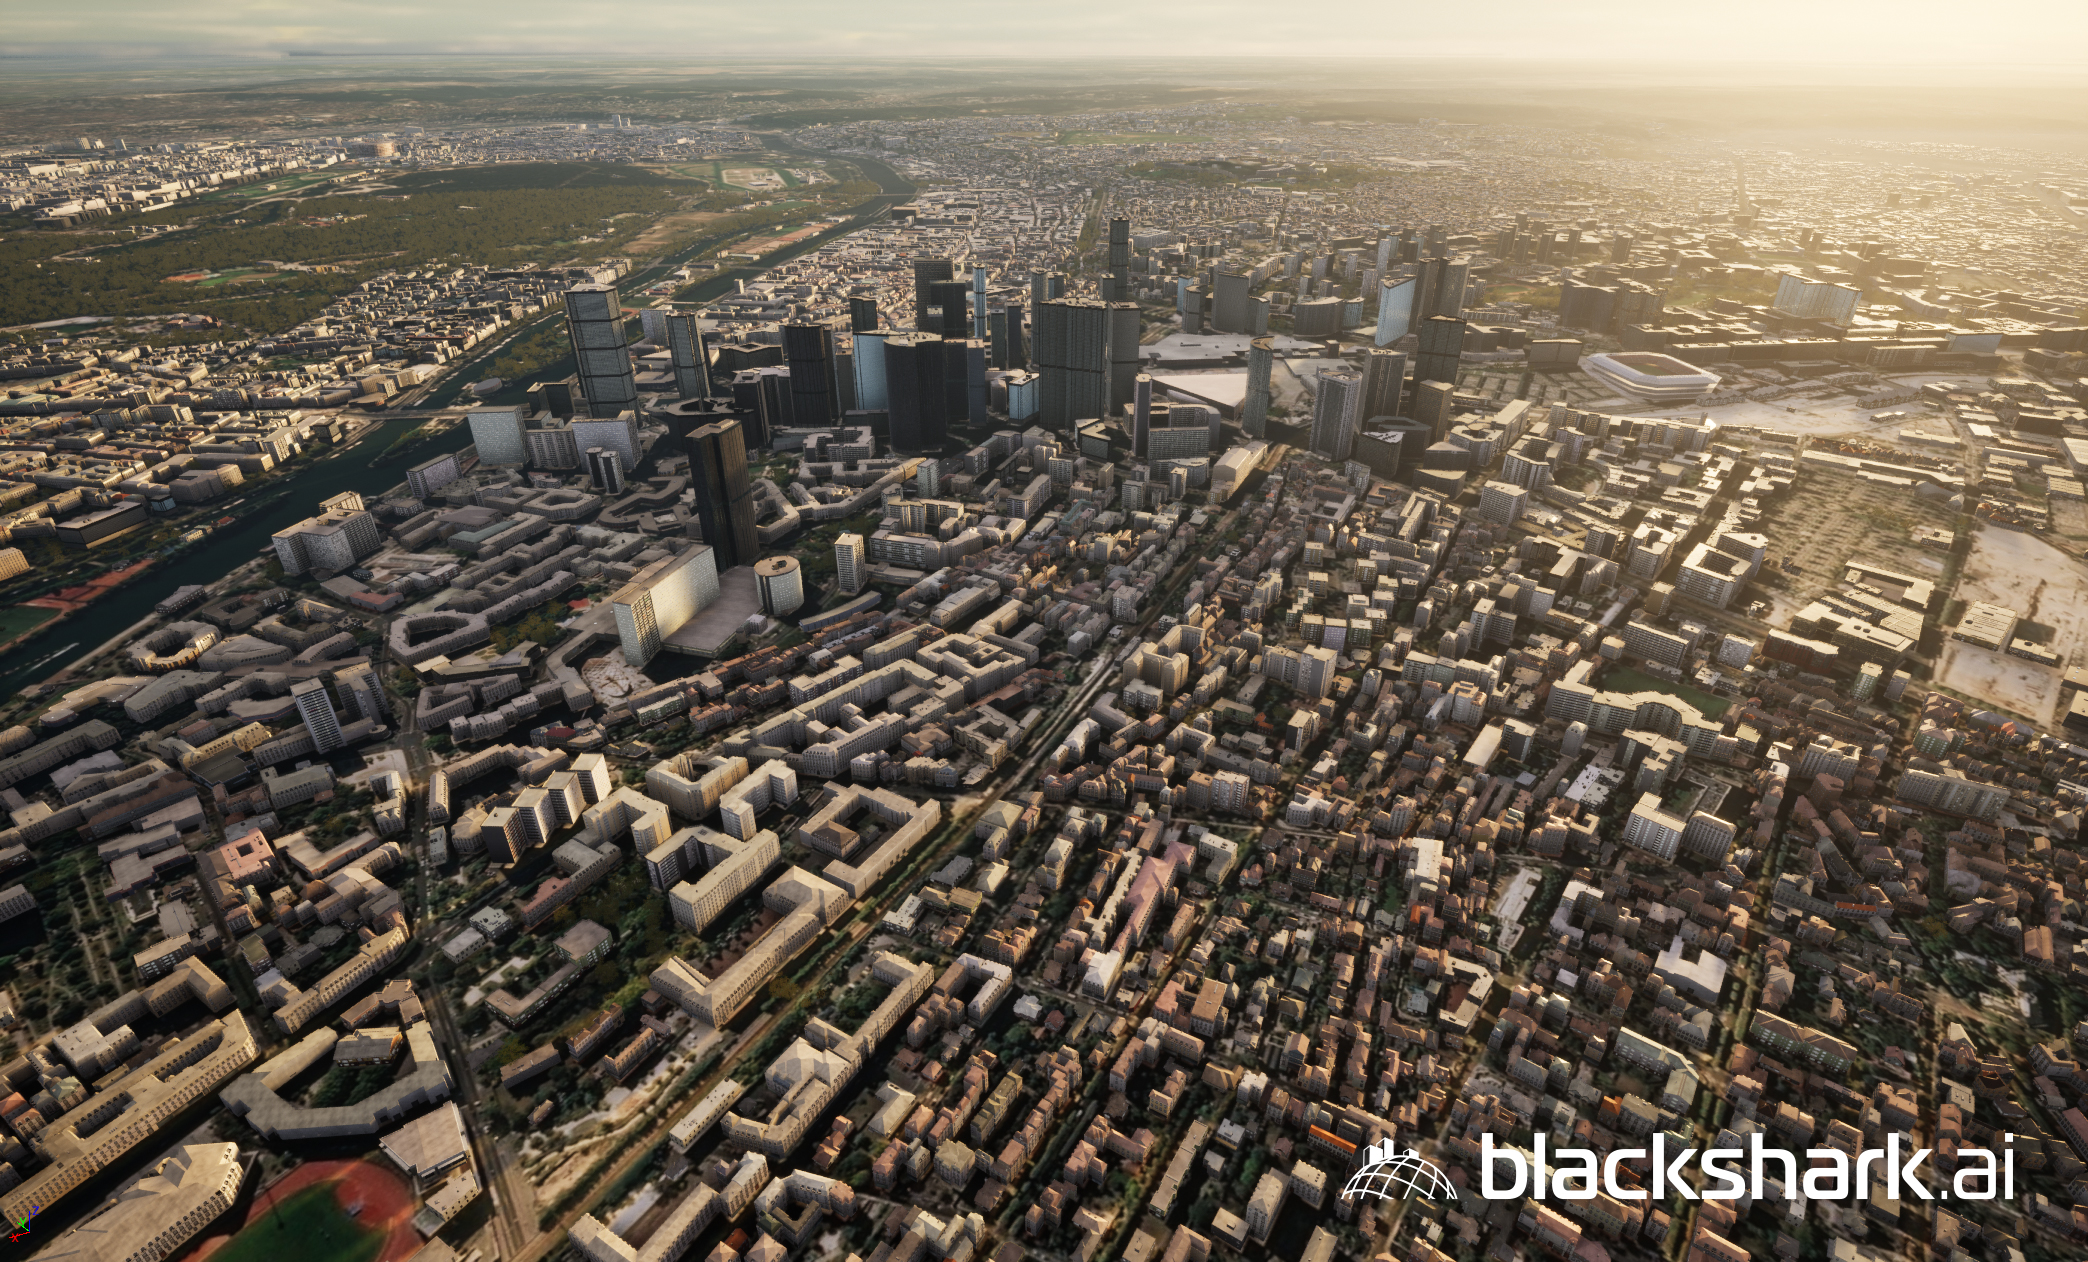 The Globe Plugin unlocks blackshark.ai’s SYNTH3D replica of the entire Earth for Unreal Engine 5 and is now available to anyone on Epic Games’ Unreal Engine Marketplace